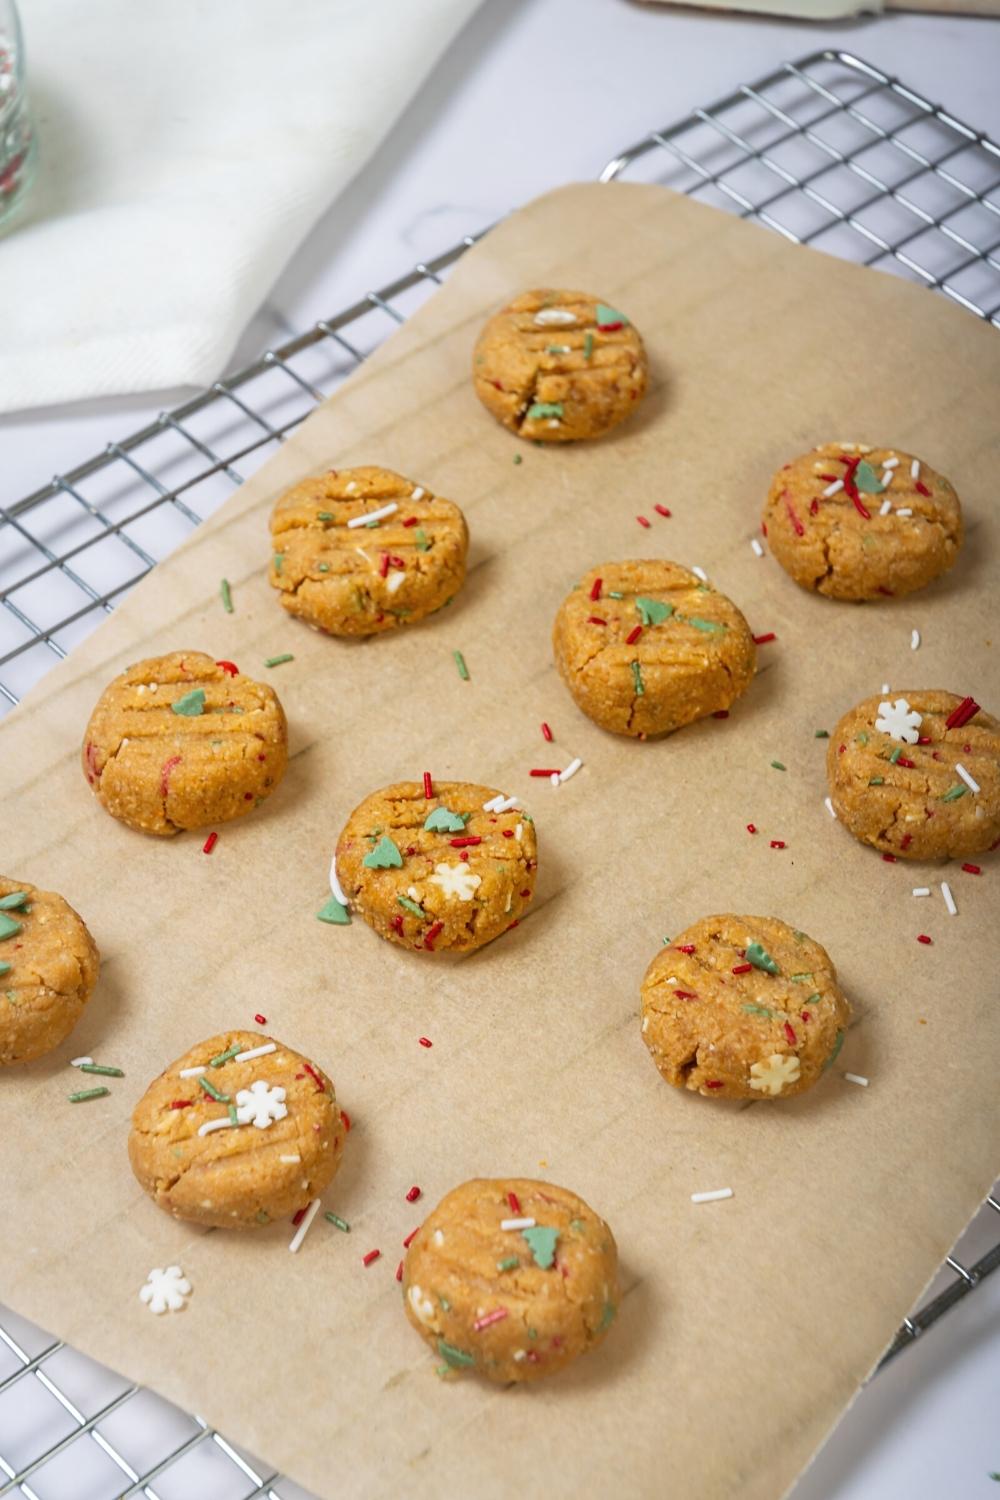 Three rows of four no bake peanut butter cookies with red, white, and green sprinkles on them on a sheet of parchment paper on a wire rack.